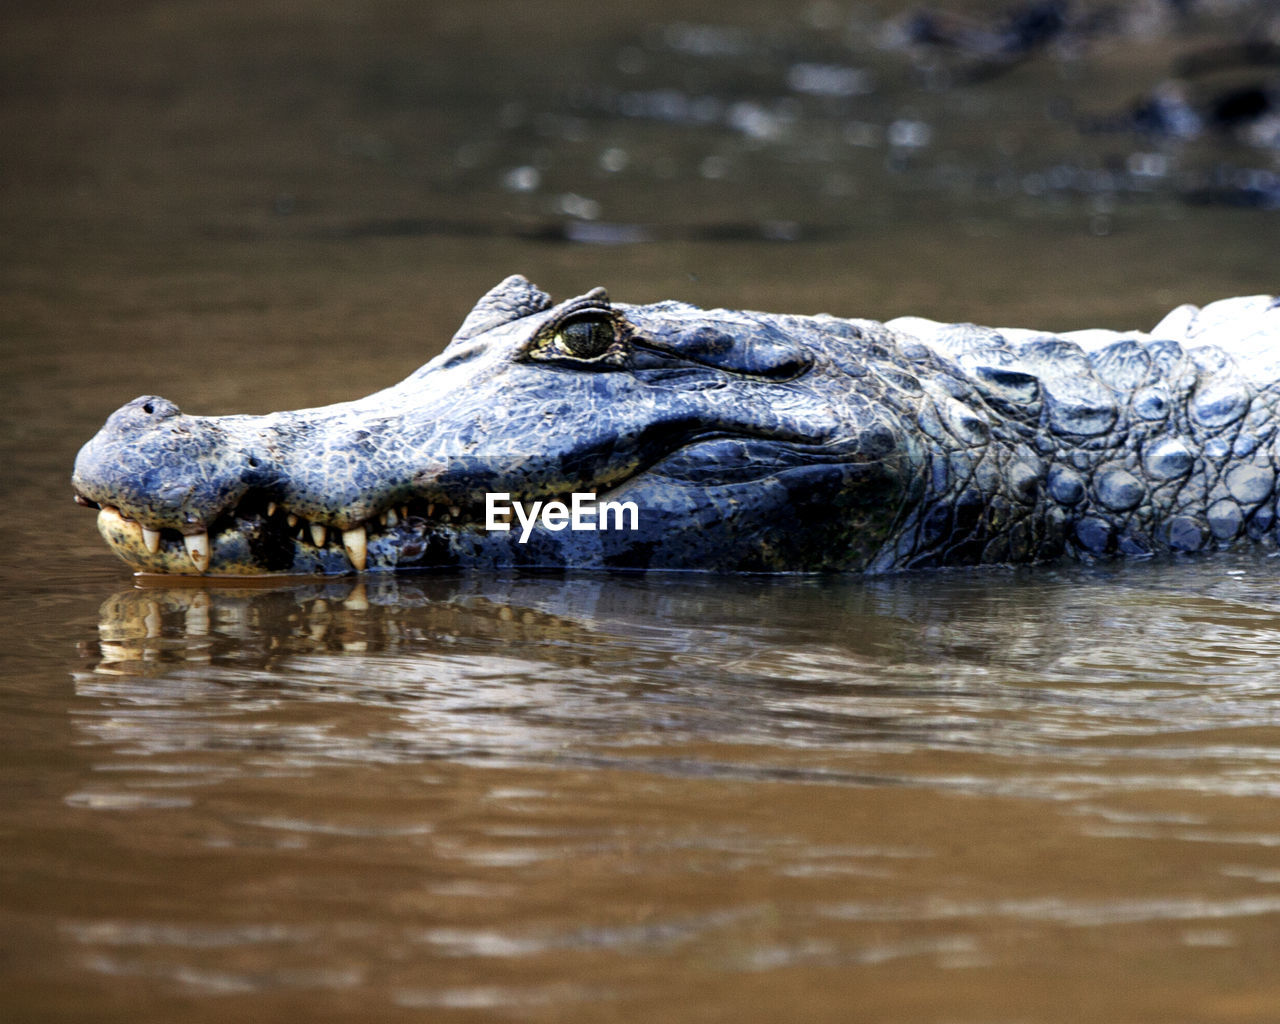 Closeup portrait of black caiman swimming in water with jaws open showing teeth, bolivia. 